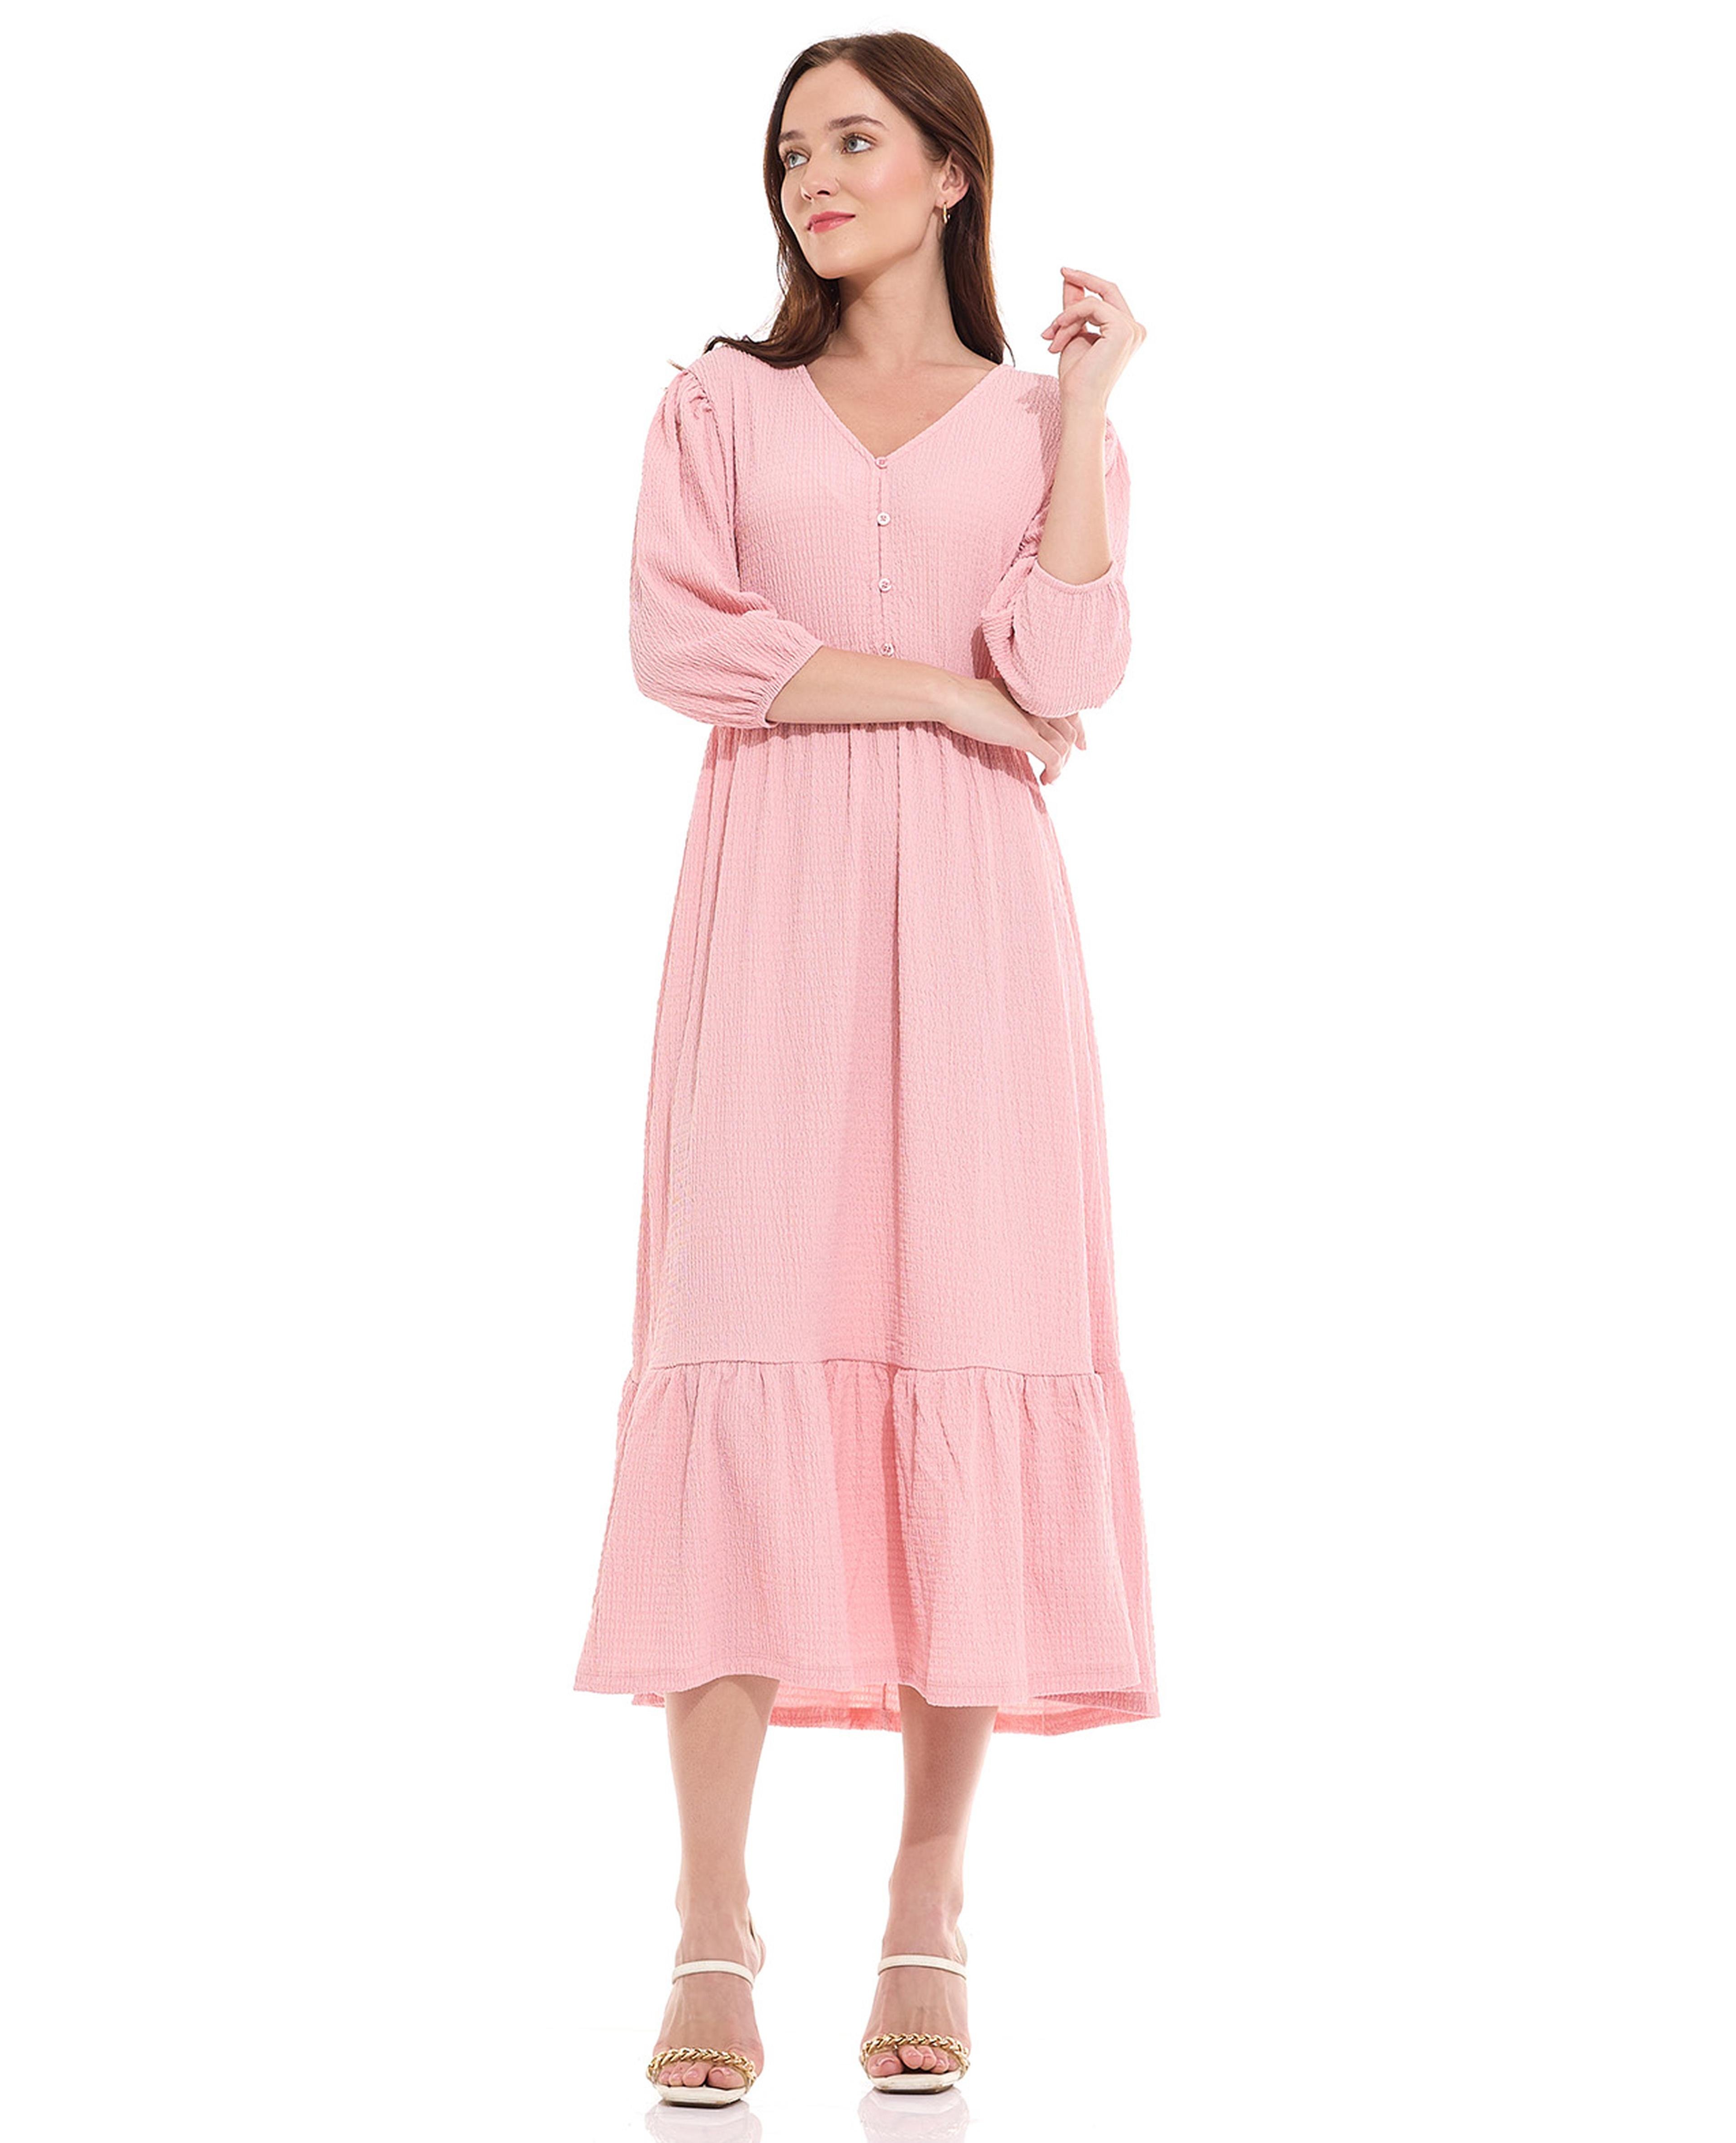 Textured Midi Dress with V-Neck and 3/4 Sleeves